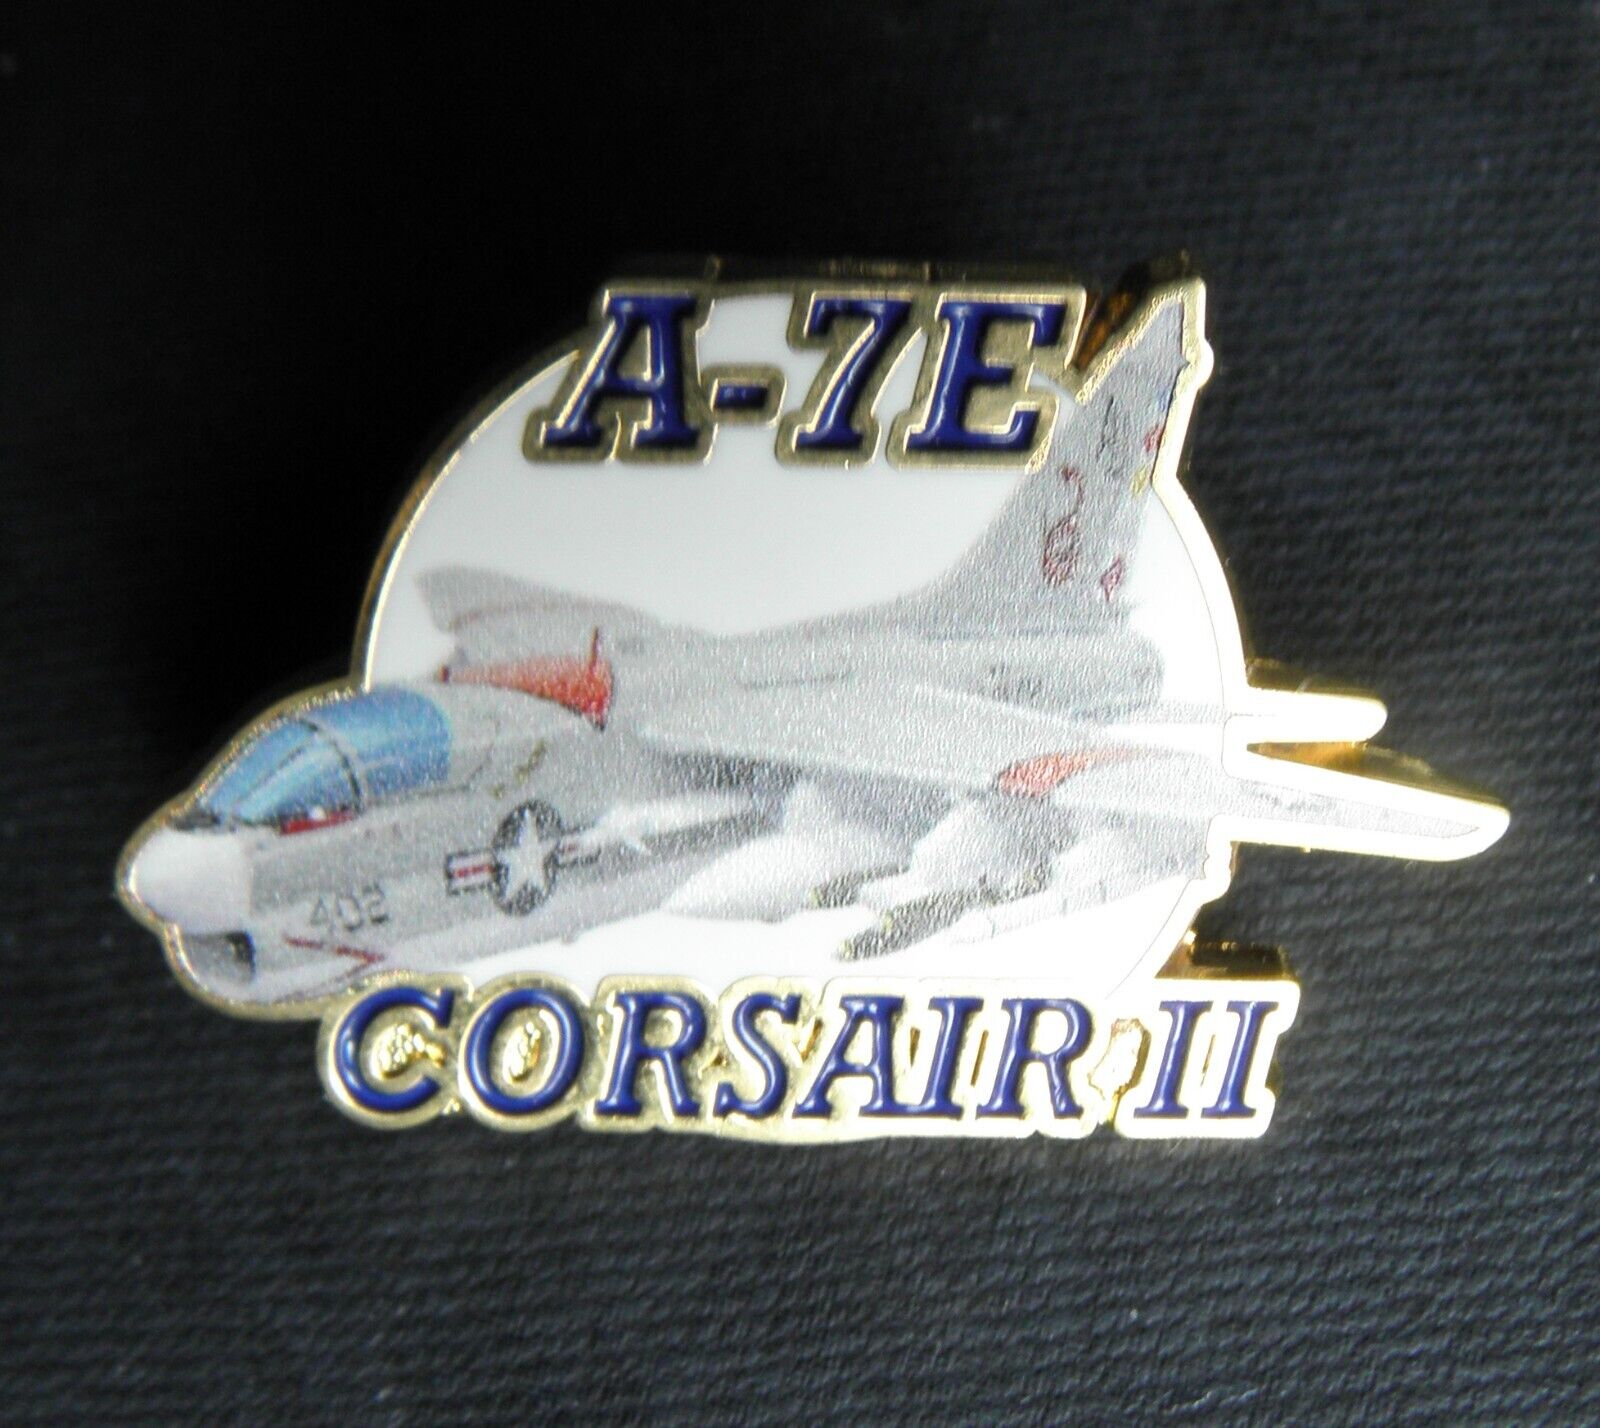 Corsair II A-7E USAF Navy Fighter Aircraft 1.1 INCHES PRINTED DESIGN WITH ENAMEL